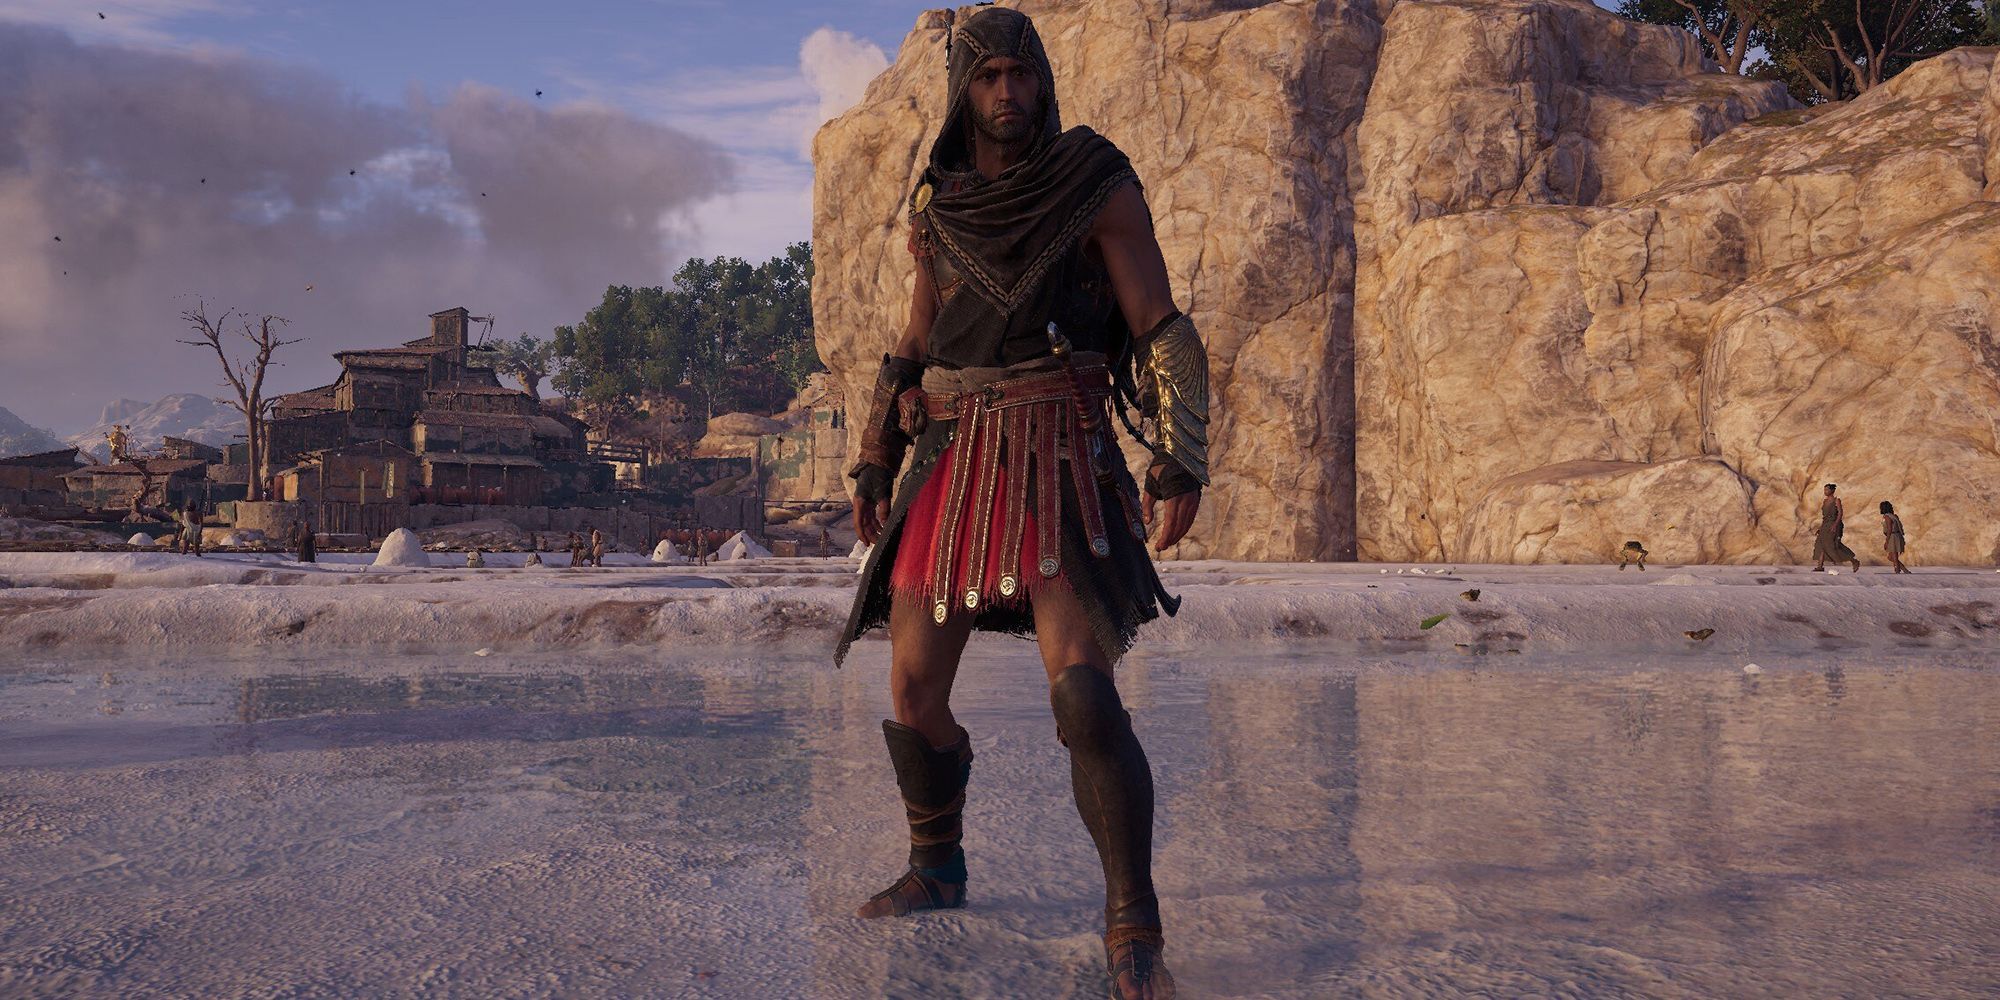 Assassins-Creed-Odyssey---Alexios-Standing-In-The-Pirate-Armor-Set